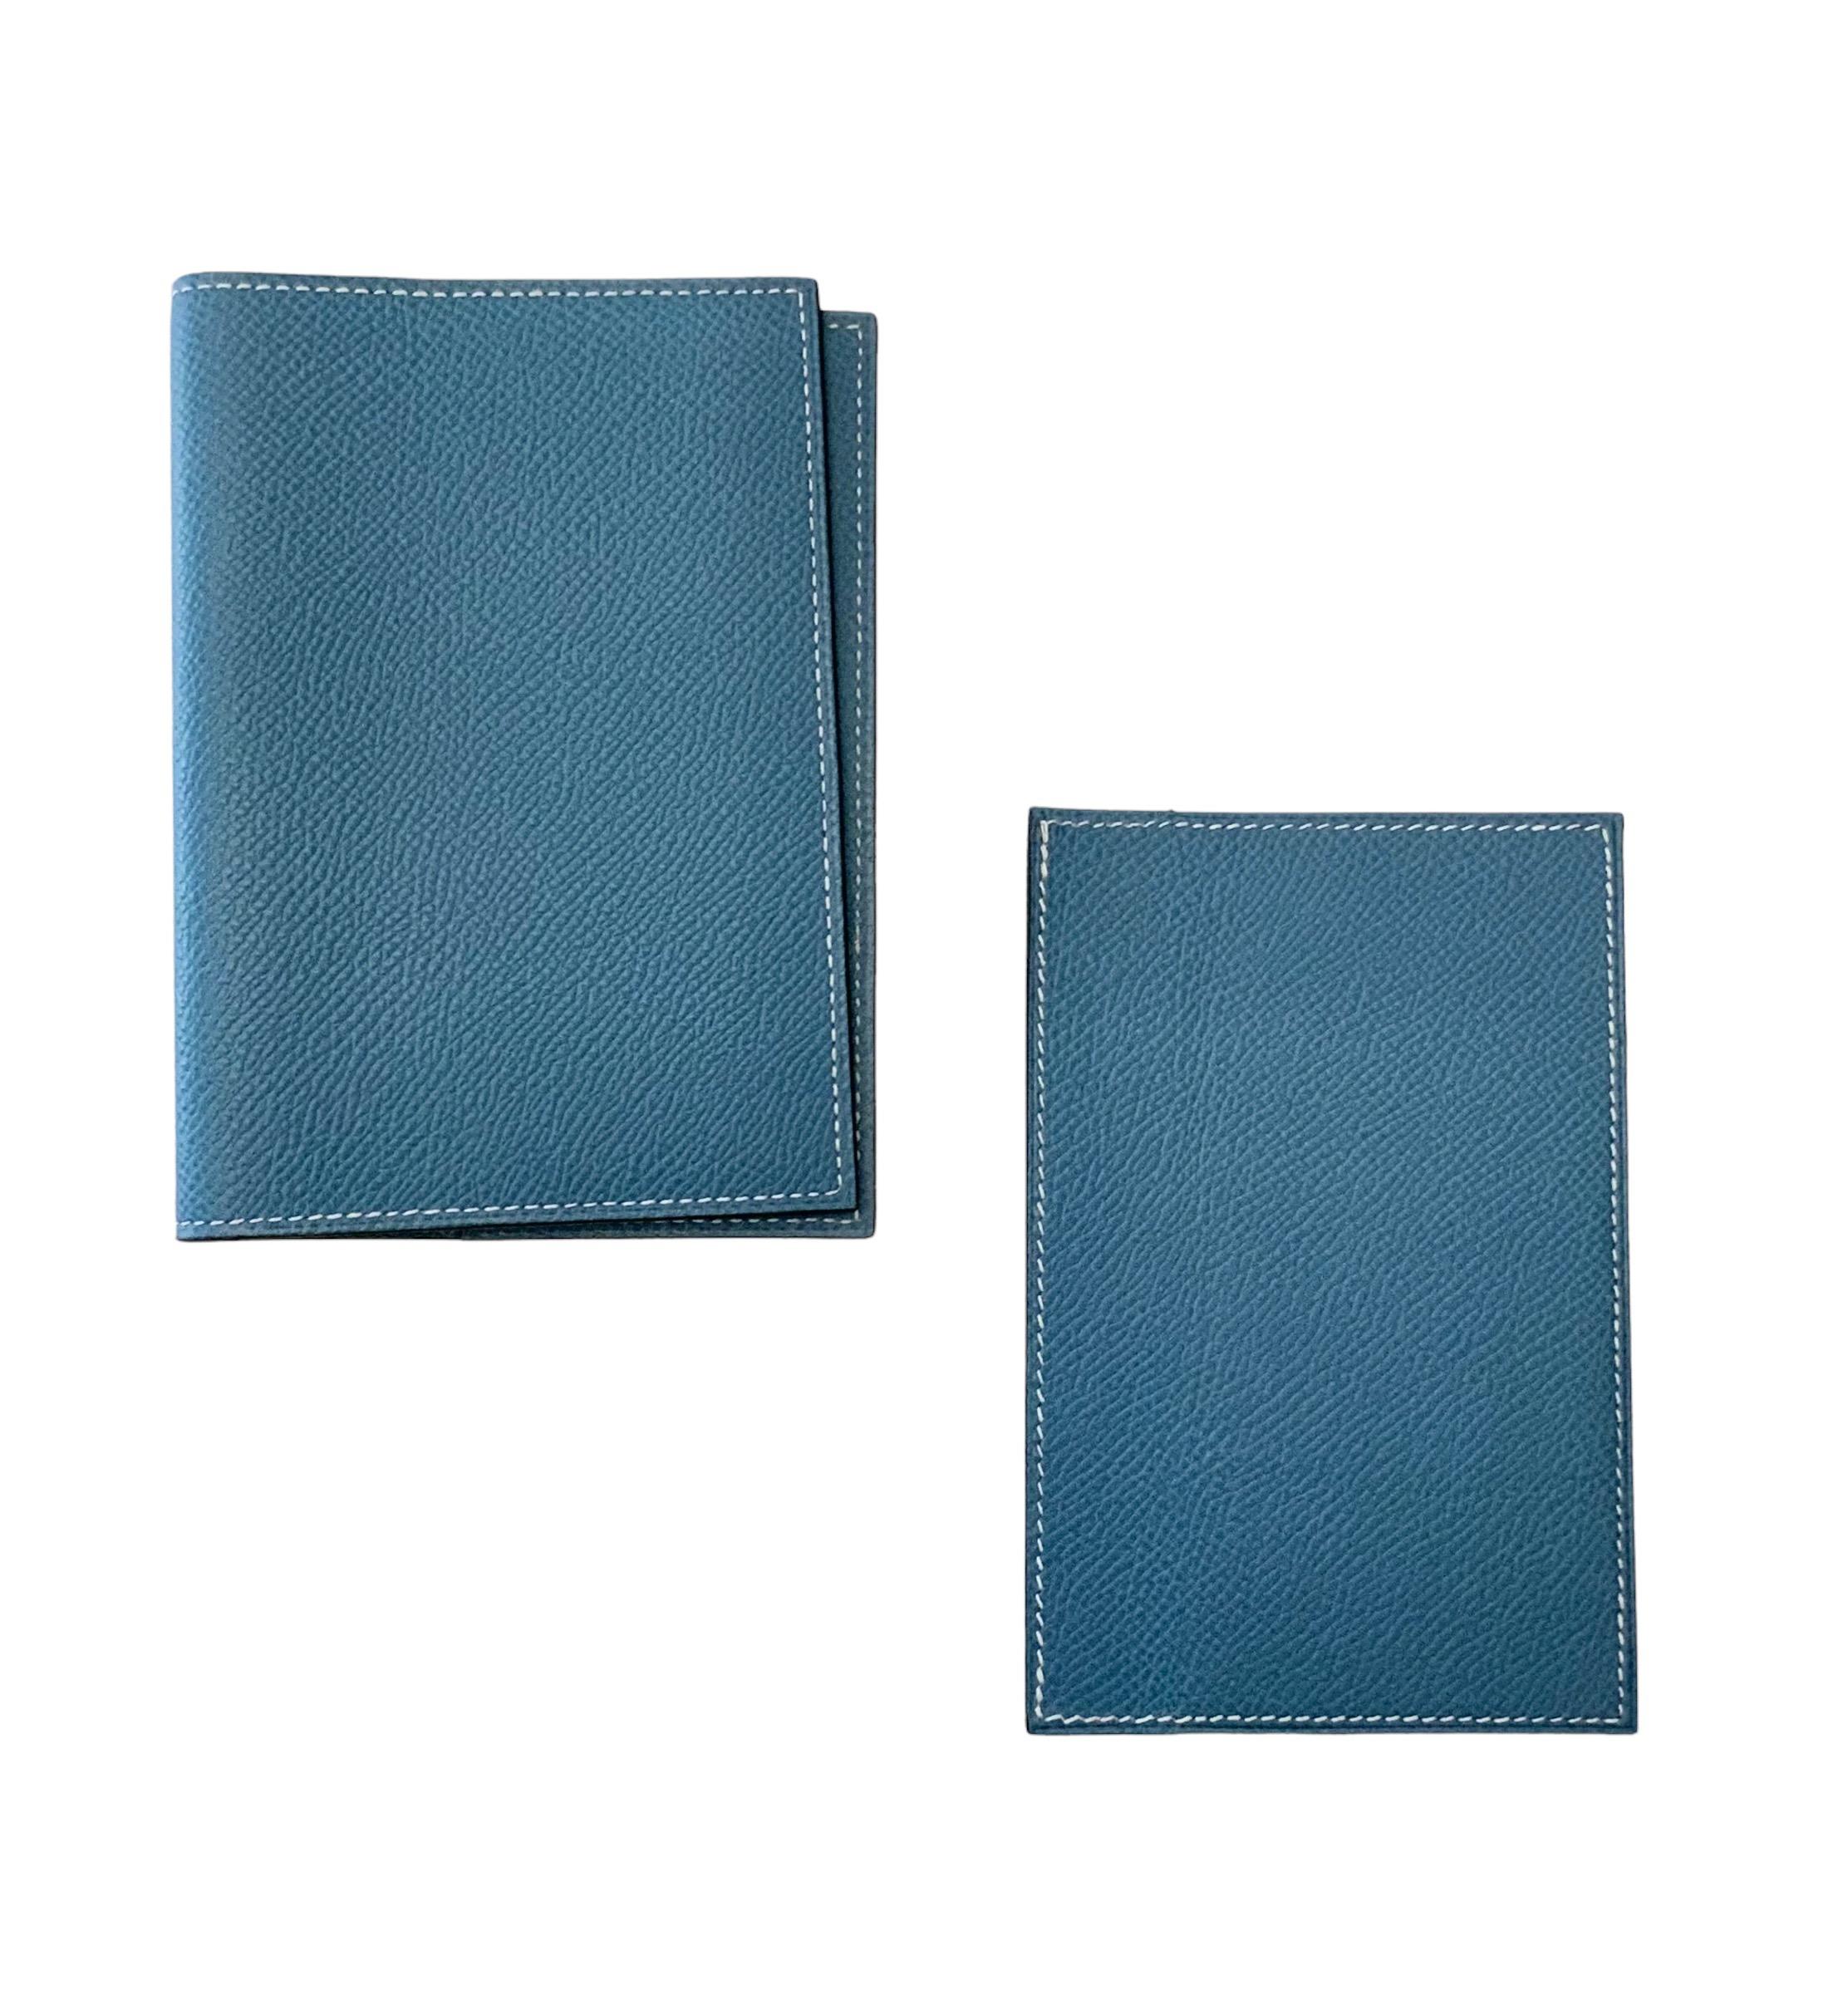 This pre-owned Agenda Cover PM from the house of Hermès is crafted in the beautiful Epsom leather in a blue jean color with a white stitching.
It features a pin for an agenda or note book and 2 flat pockets.
The independant Credit Card insert offers